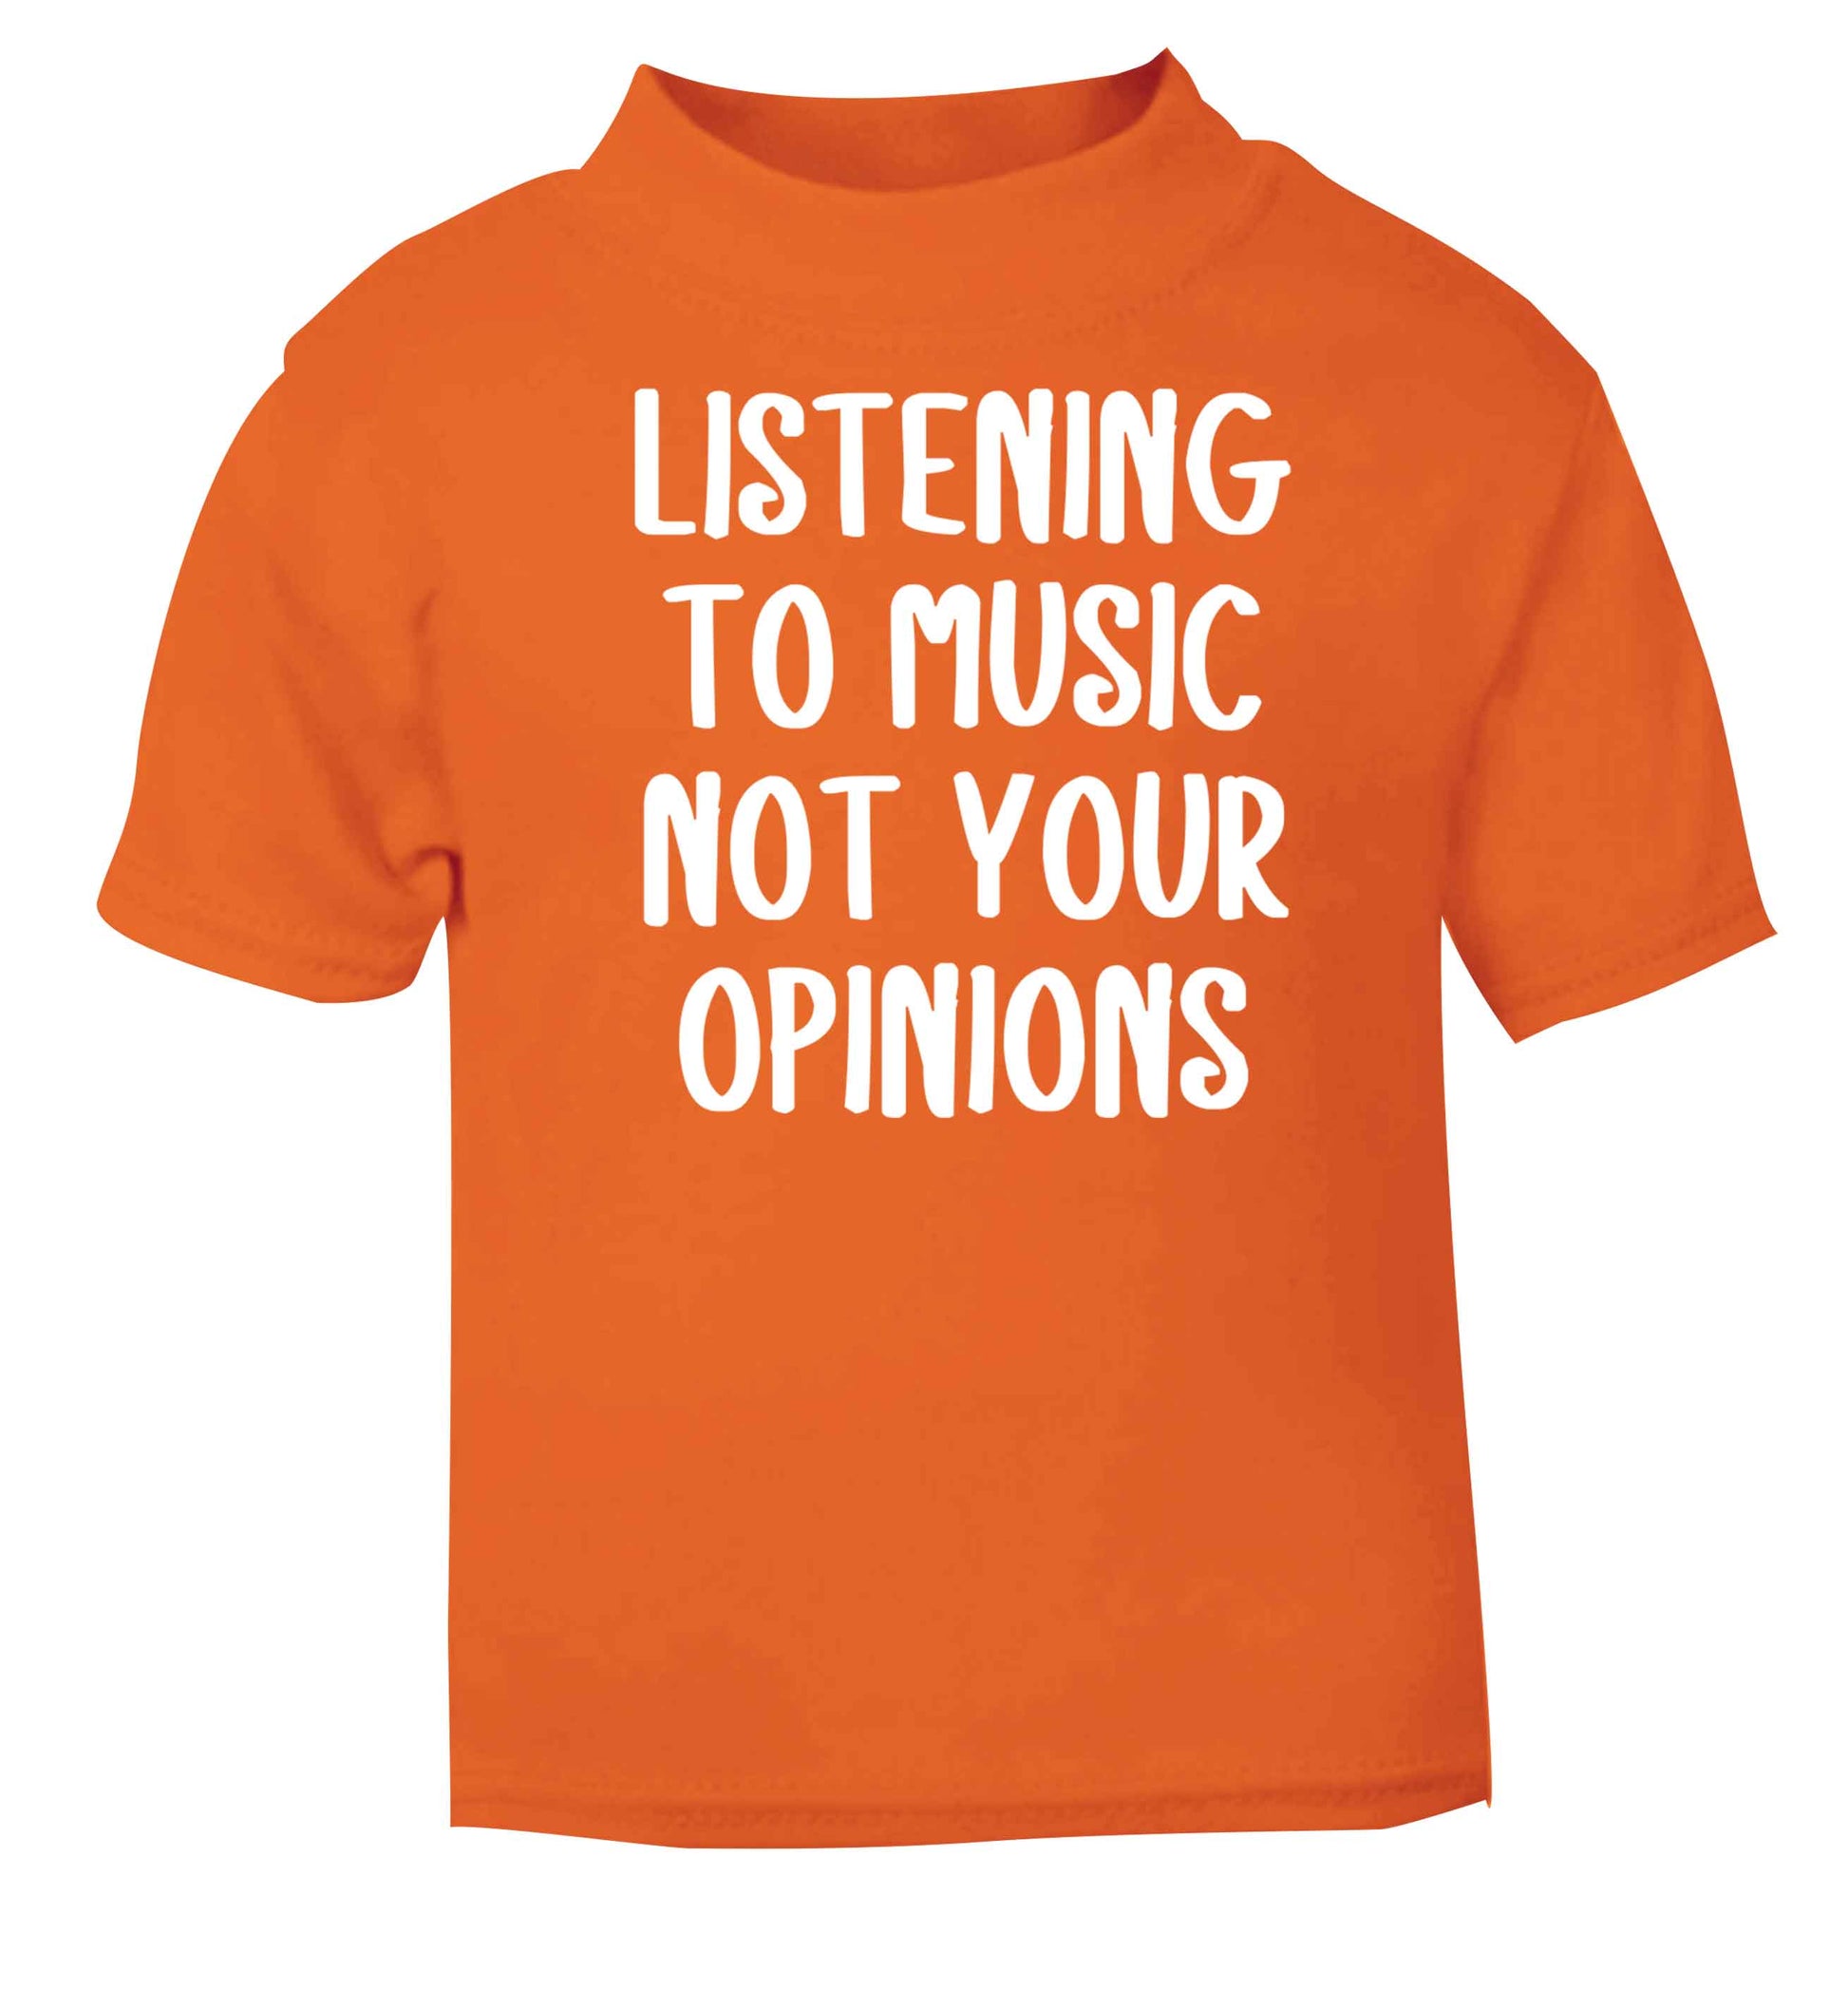 Listening to music not your opinions orange baby toddler Tshirt 2 Years